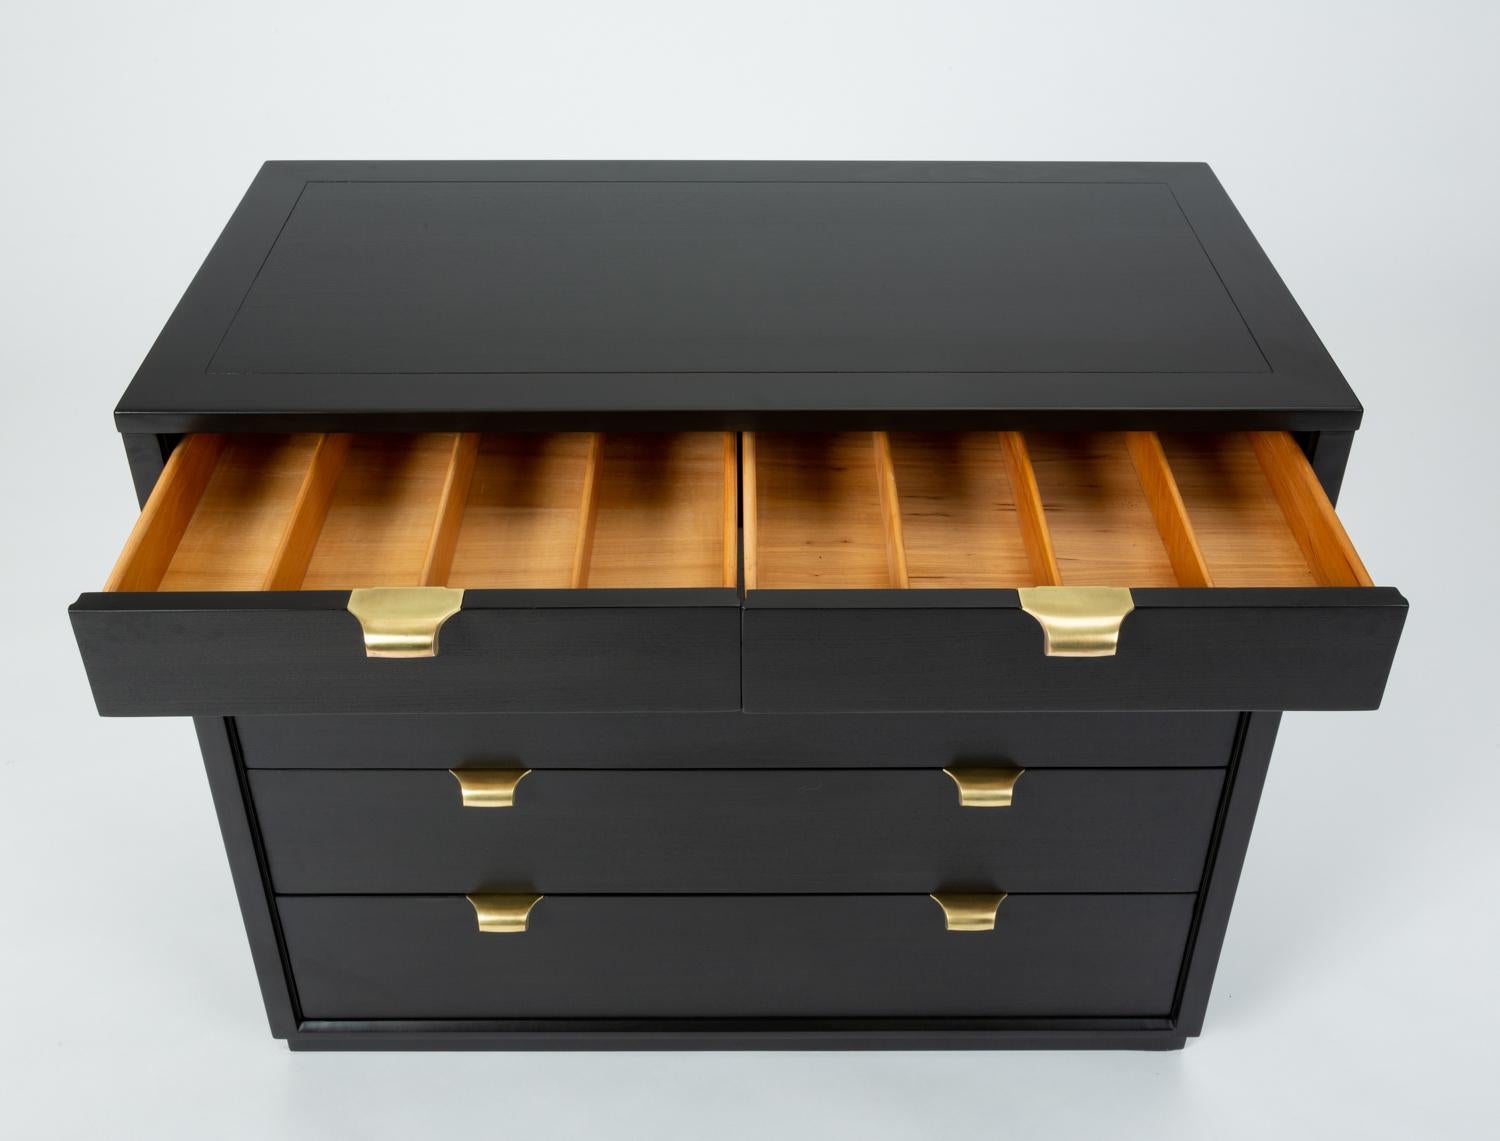 20th Century Ebonized Chest of Drawers from Edward Wormley’s Precedent Collection for Drexel